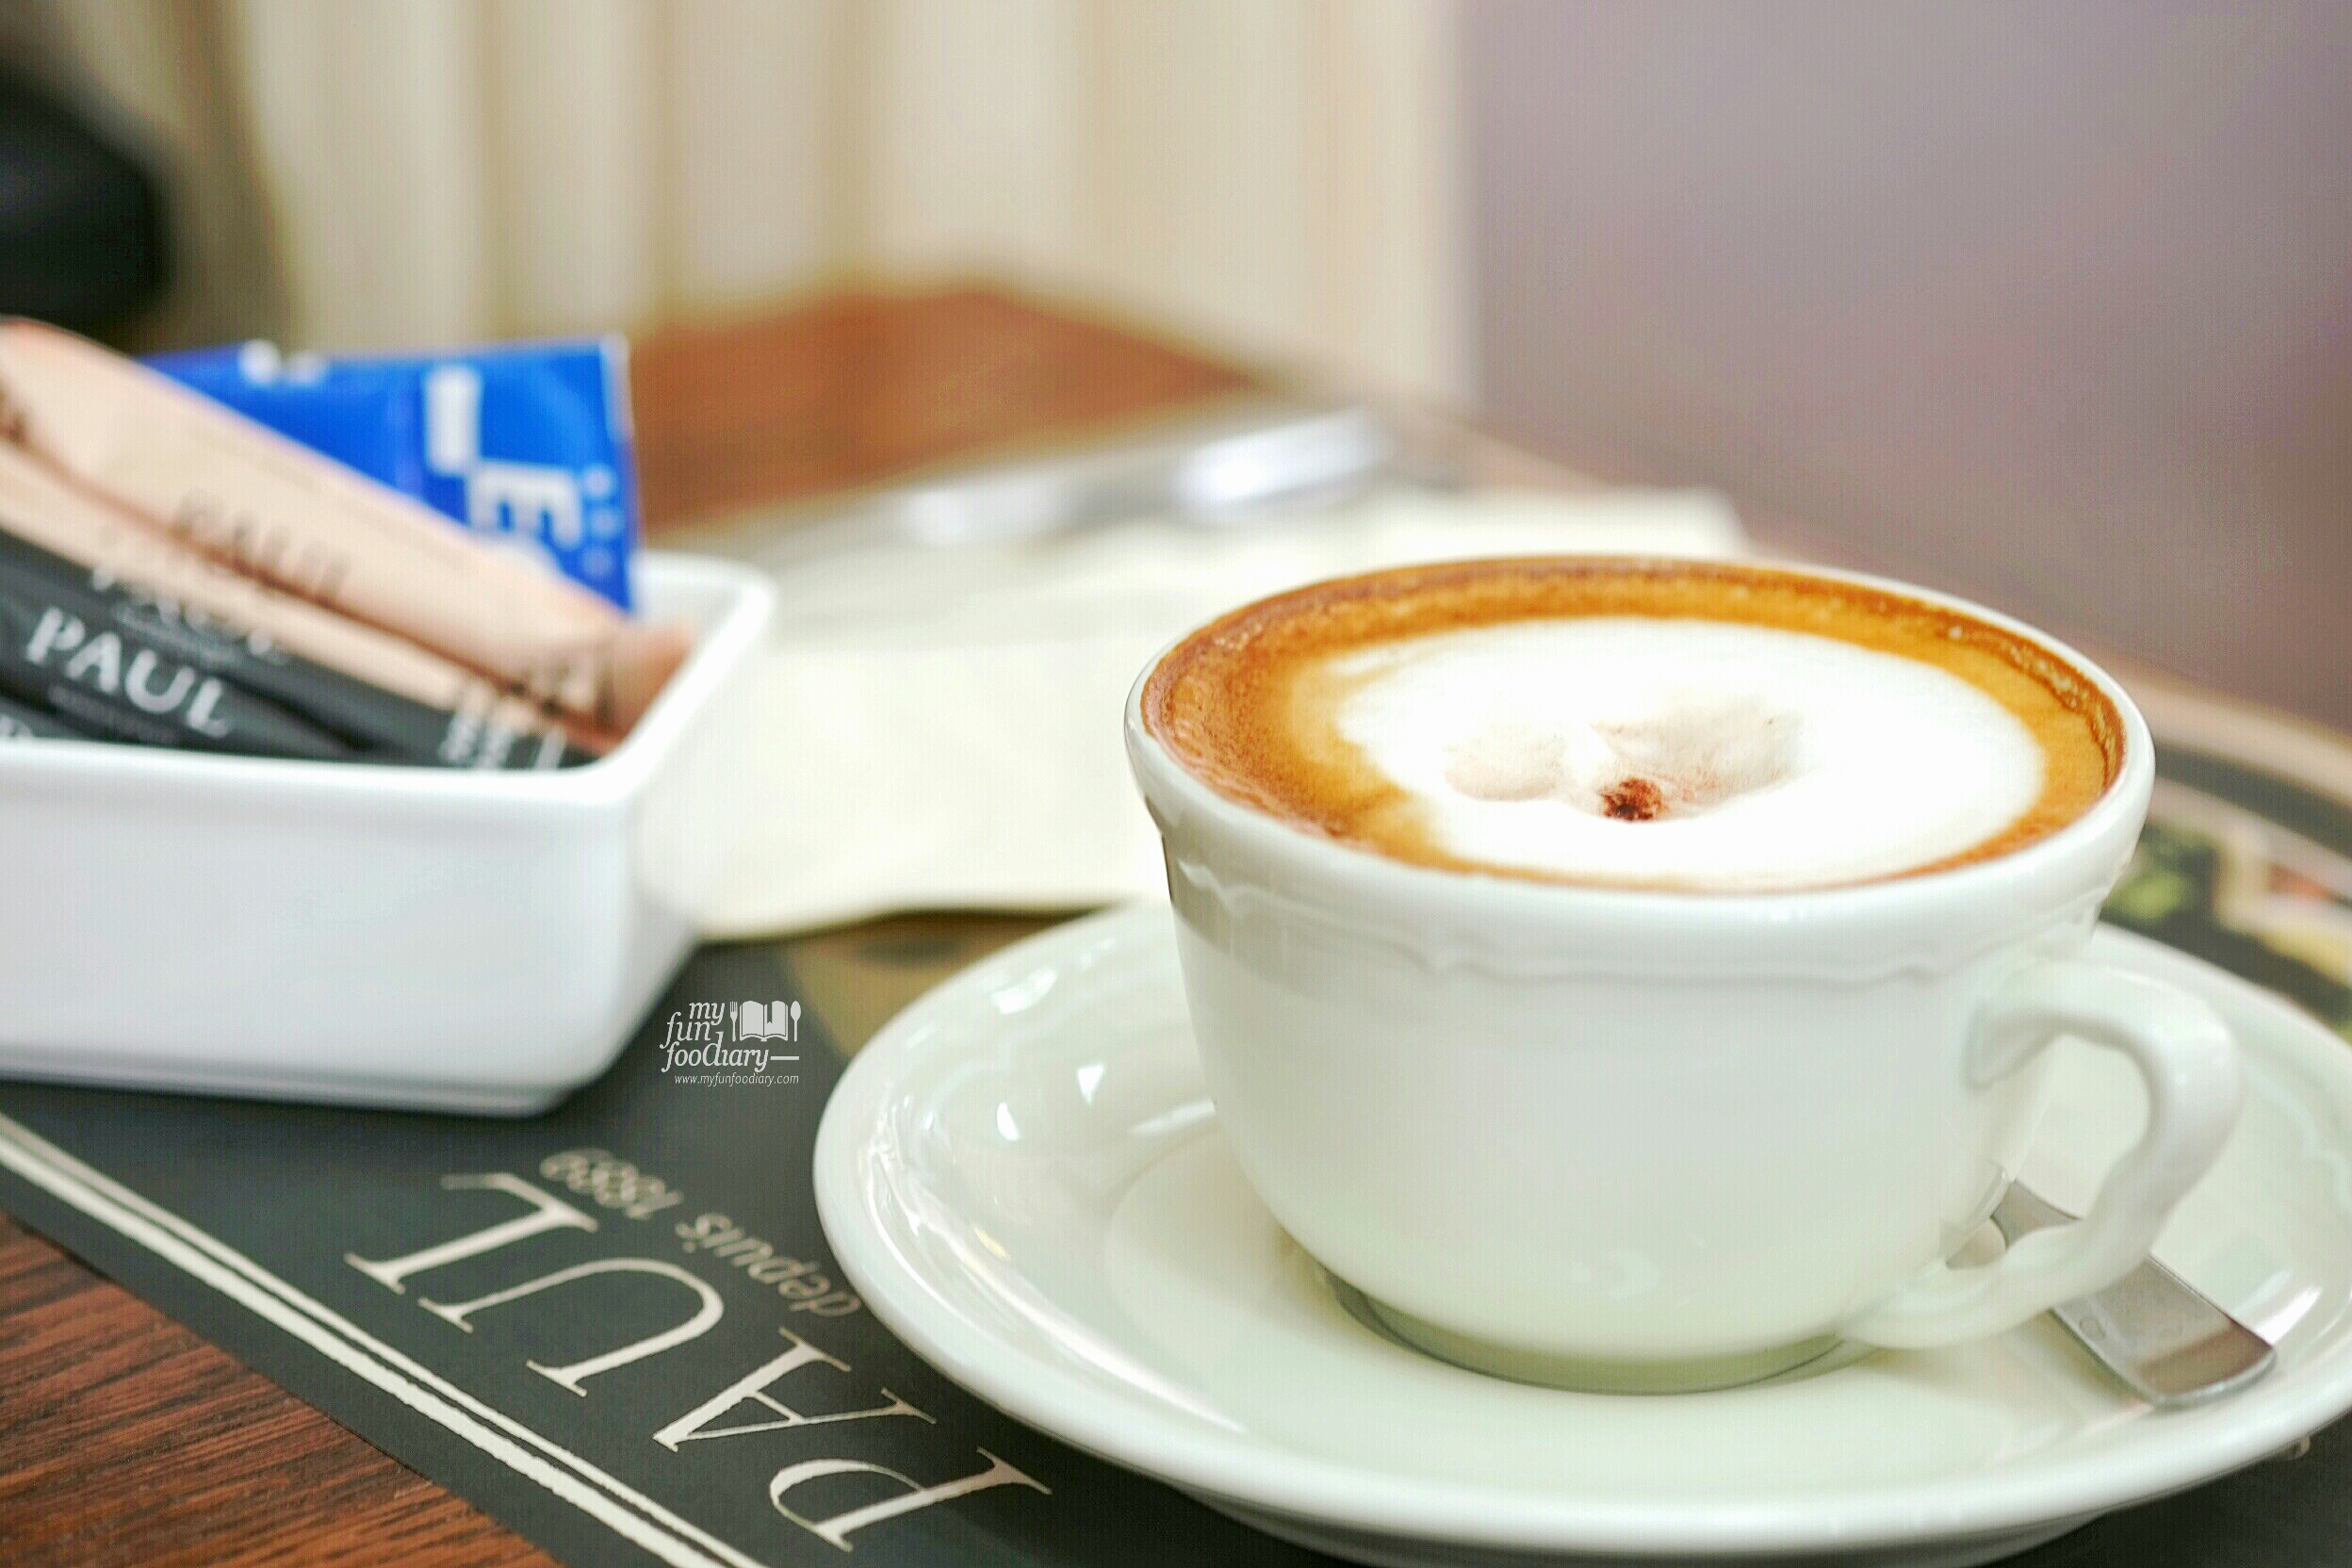 Hot Cappuccino at PAUL French Bakery by Myfunfoodiary-